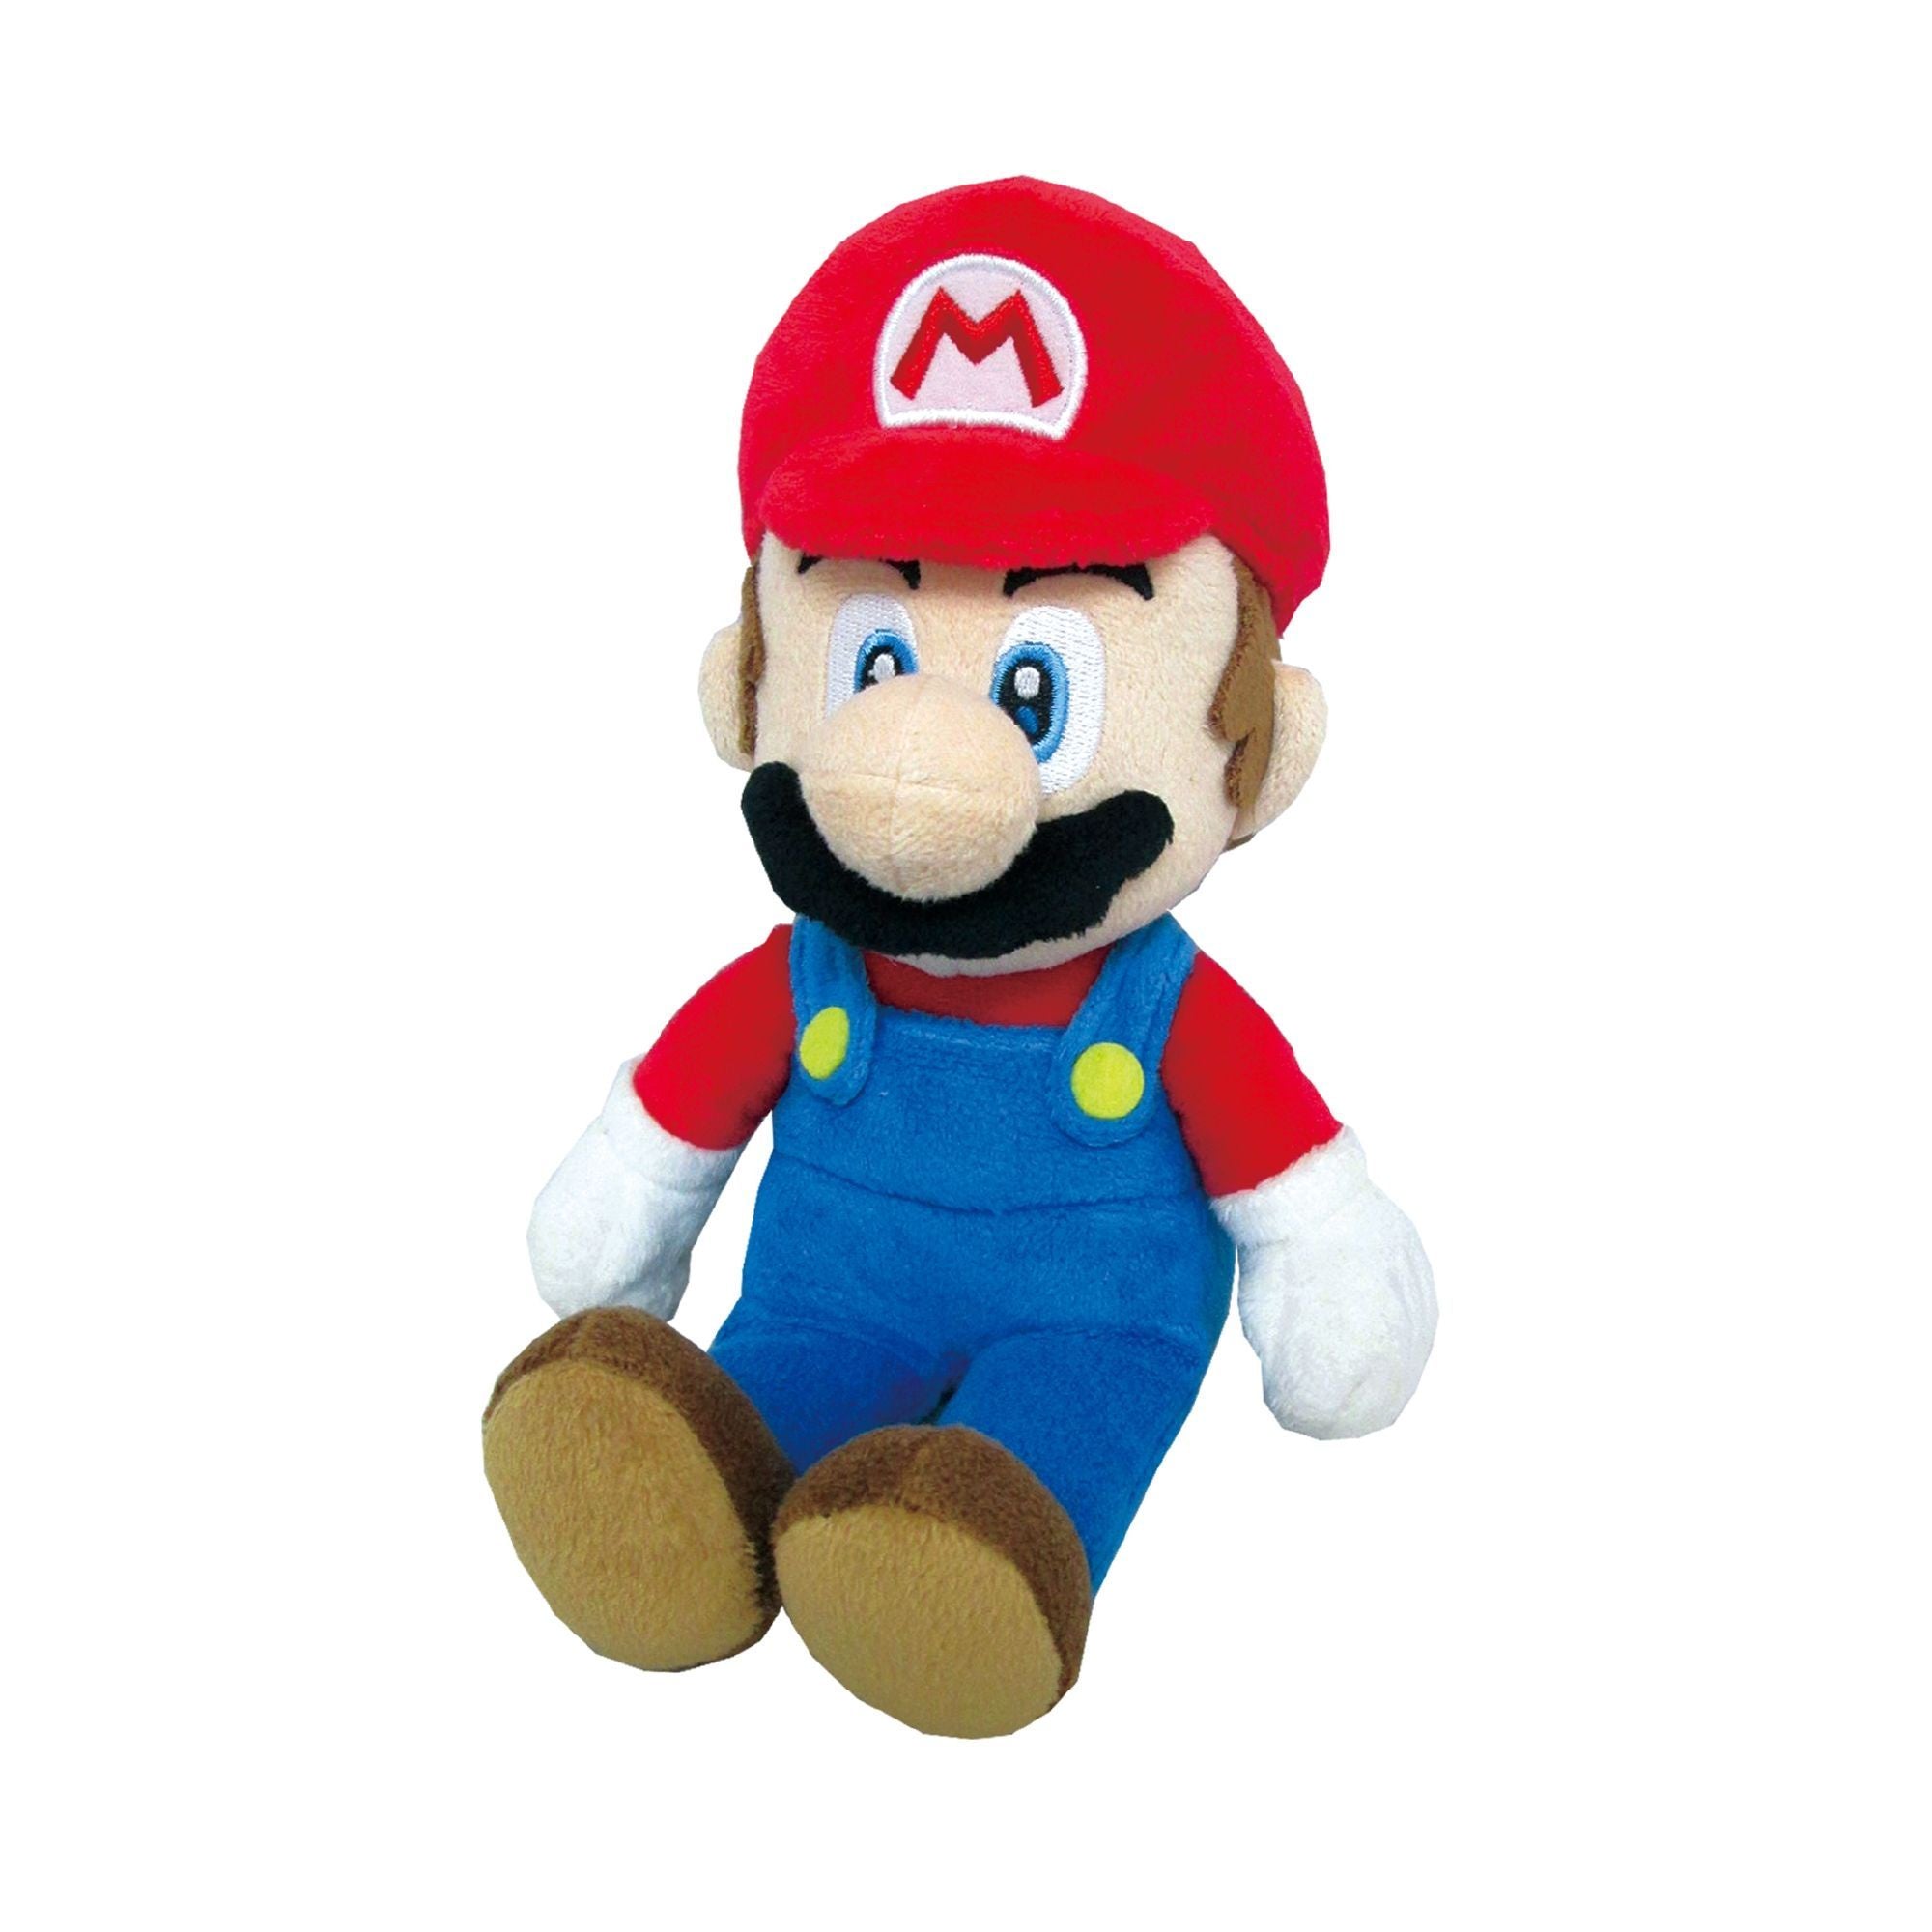 Super Mario 10 in Allstar Collection Plush Character